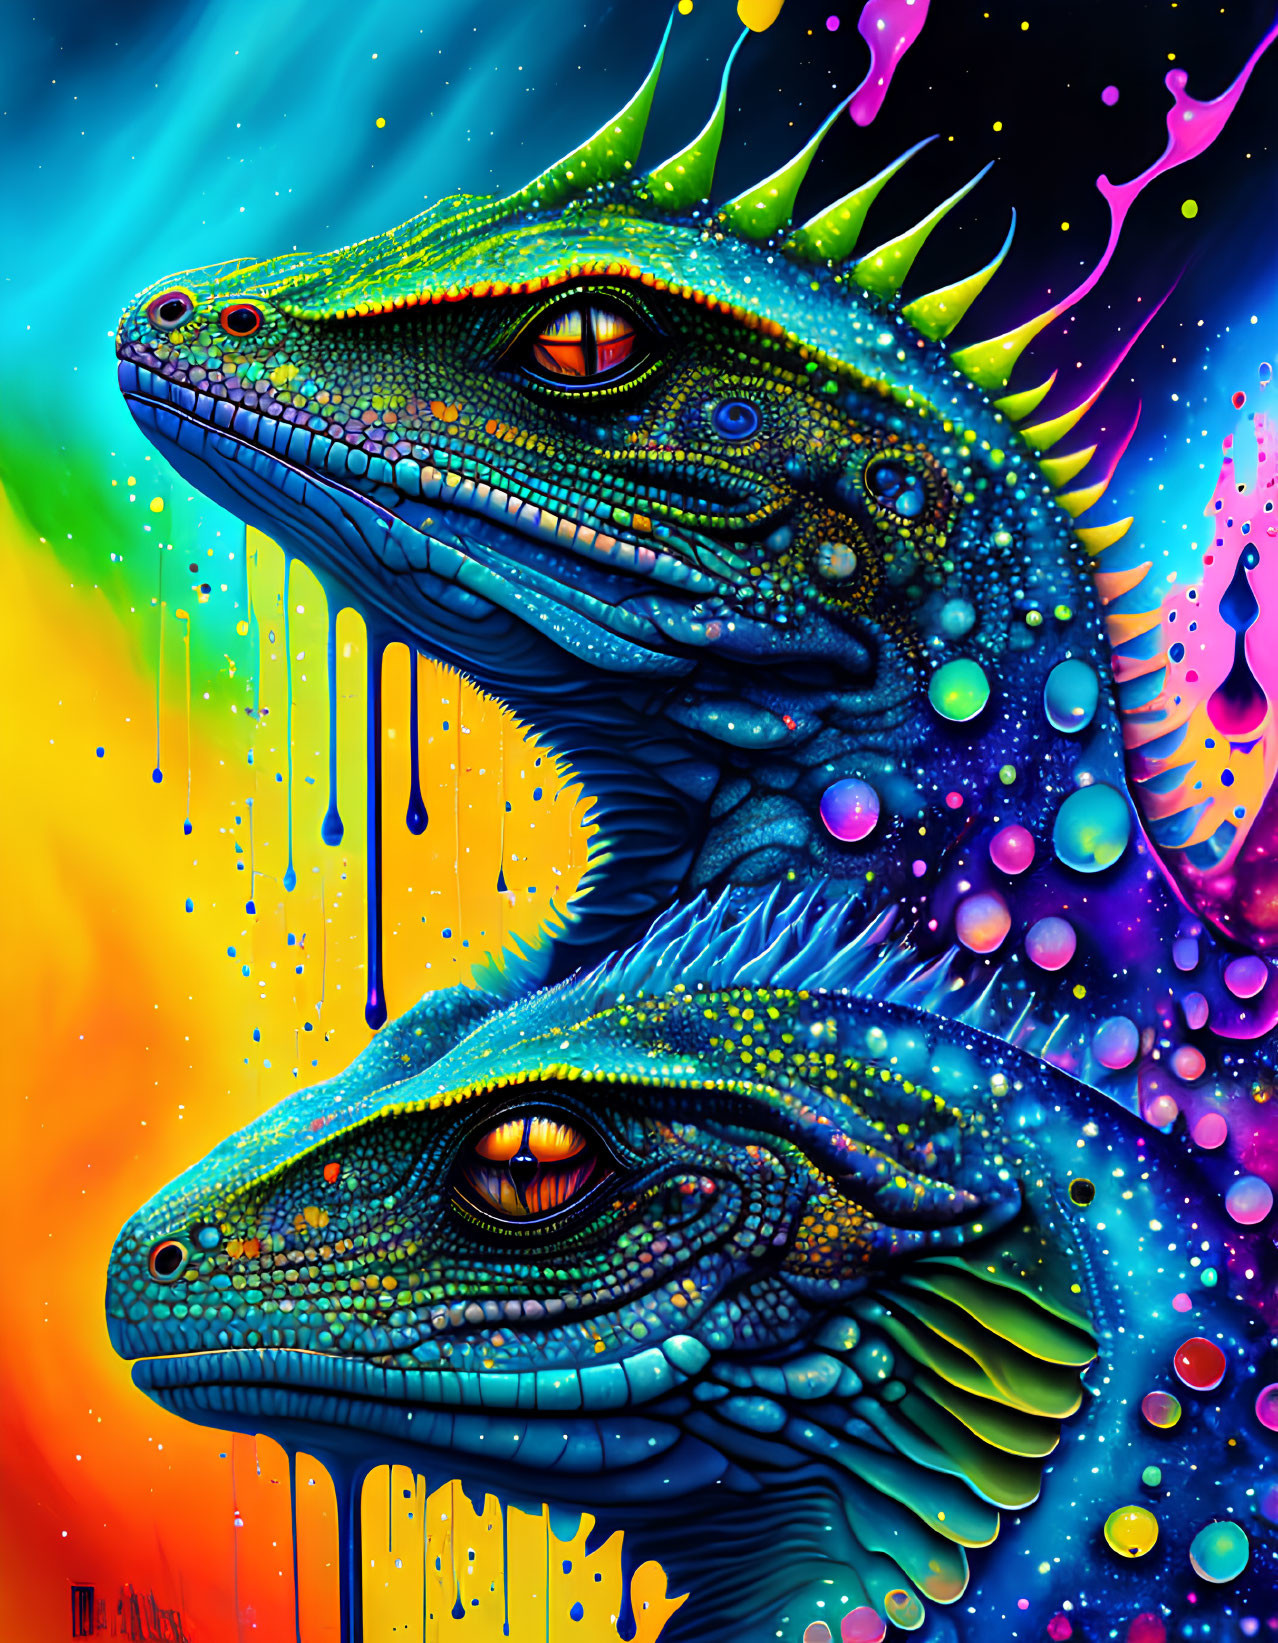 Colorful Psychedelic Iguanas Artwork on Neon Background